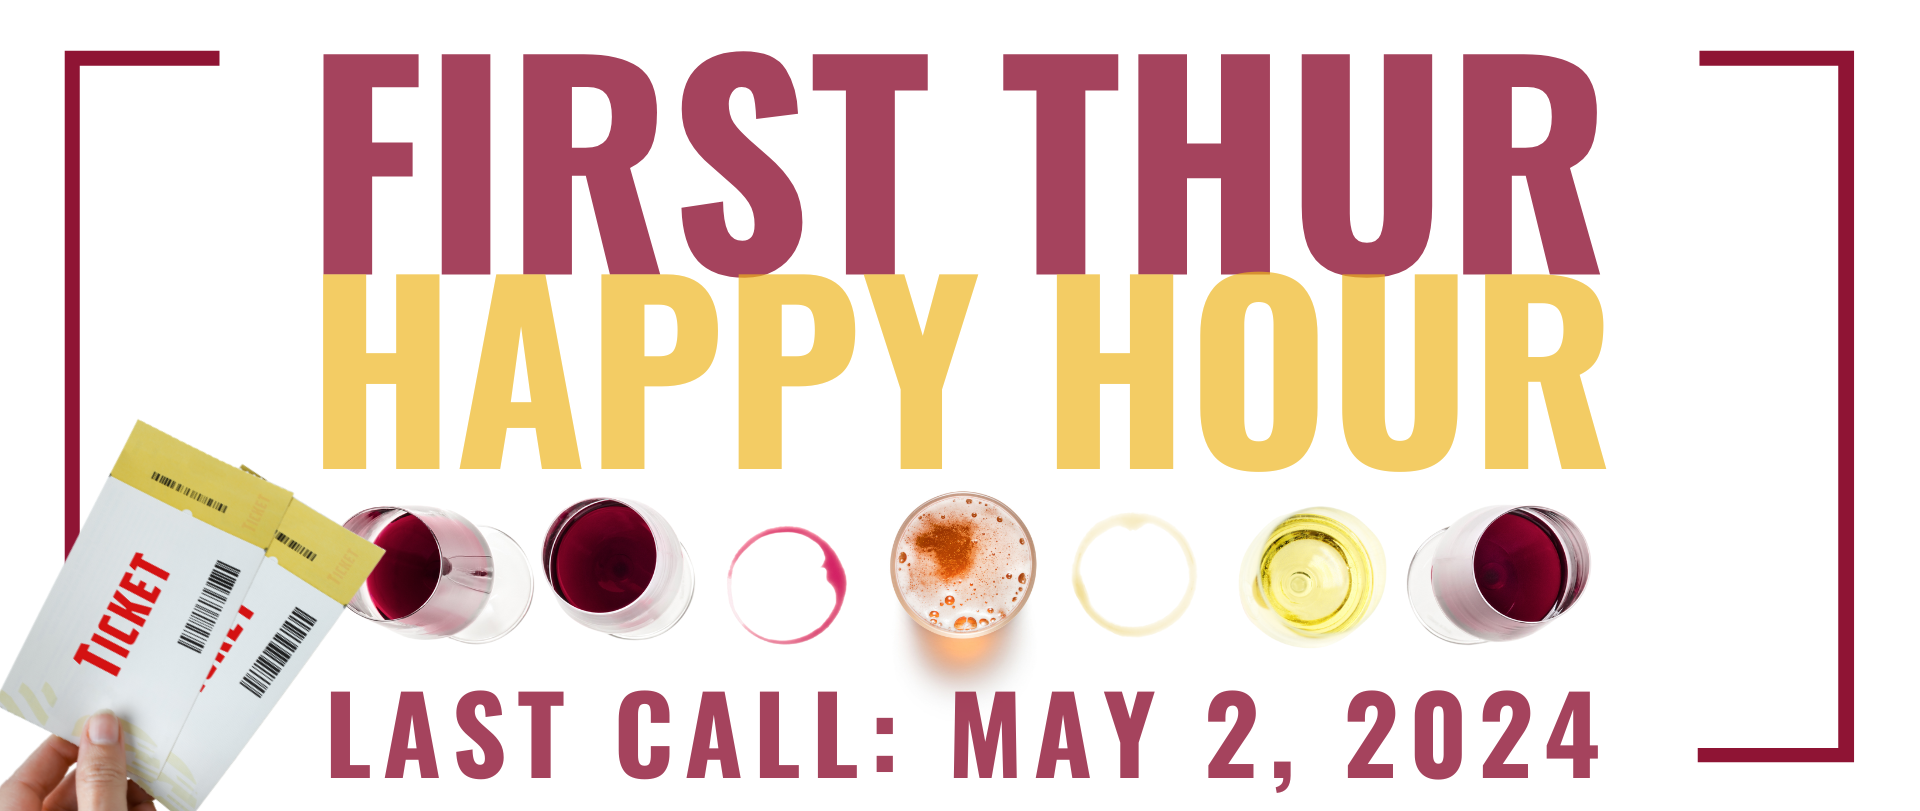 Last First Thurs May Slider